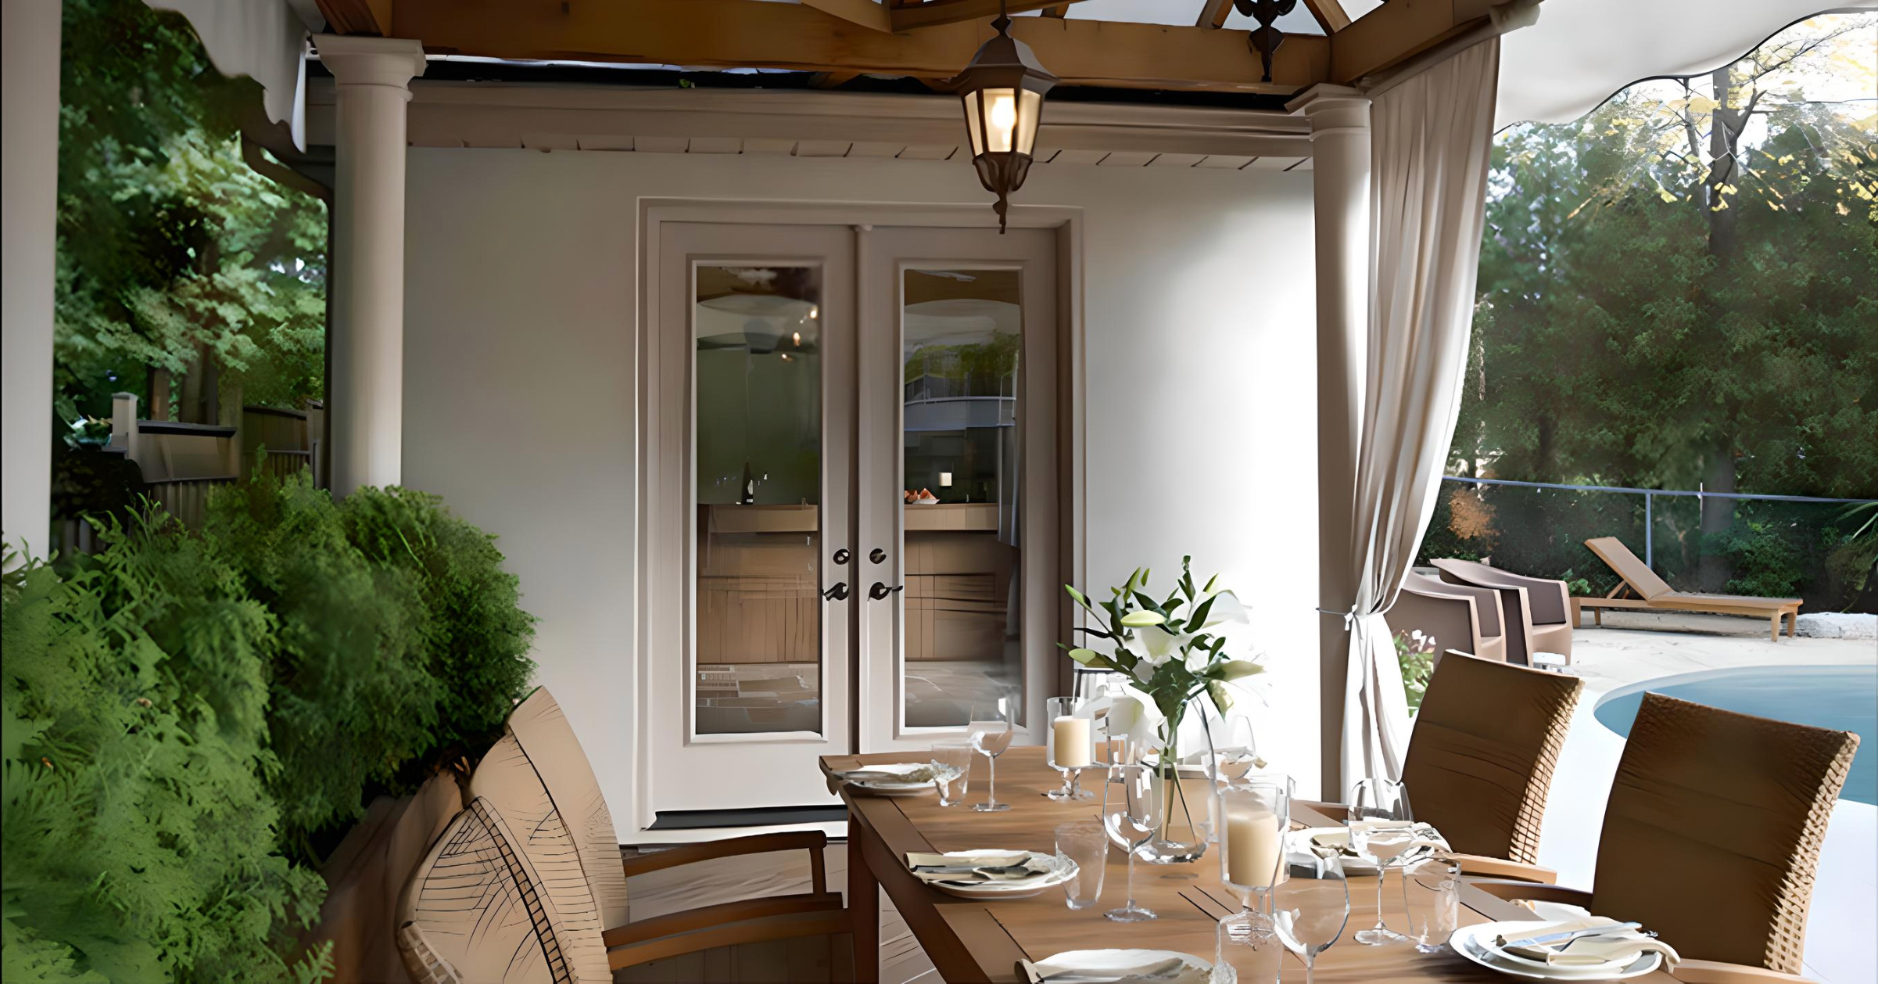 outside view of swinging patio doors from an outdoor dinning area